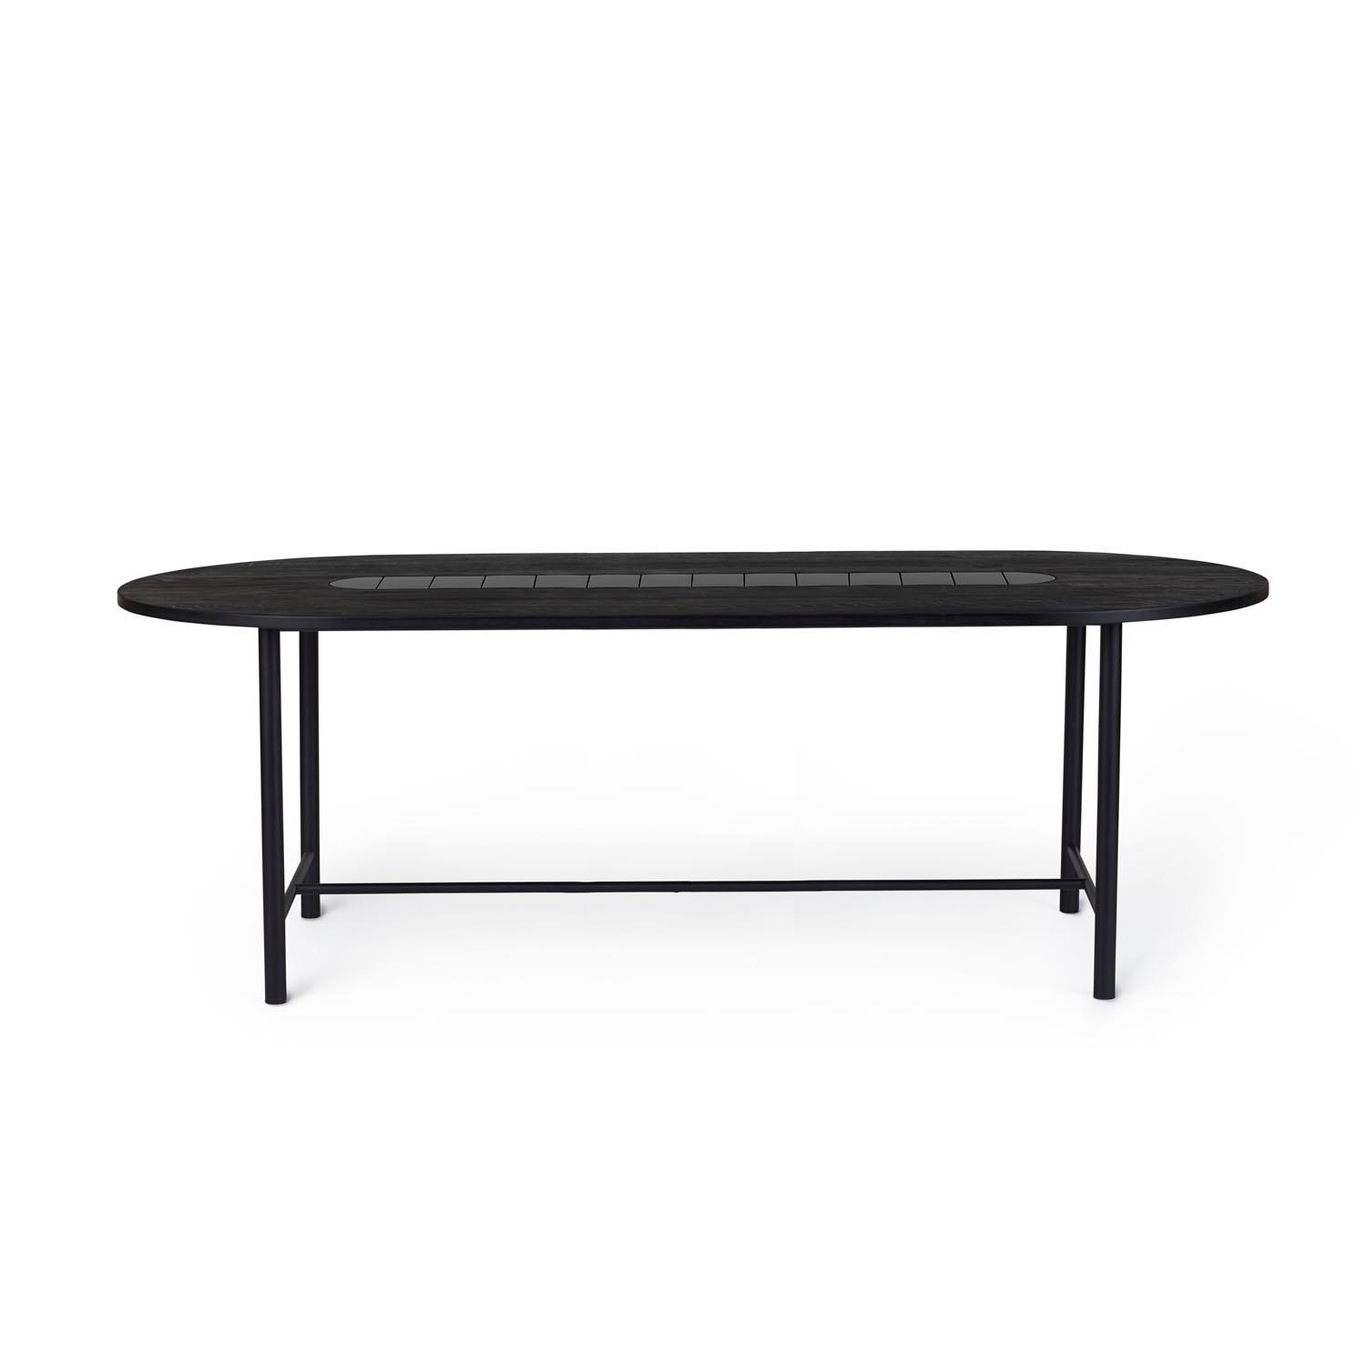 Be My Guest Dining Table 220 cm, Black Oiled Oak